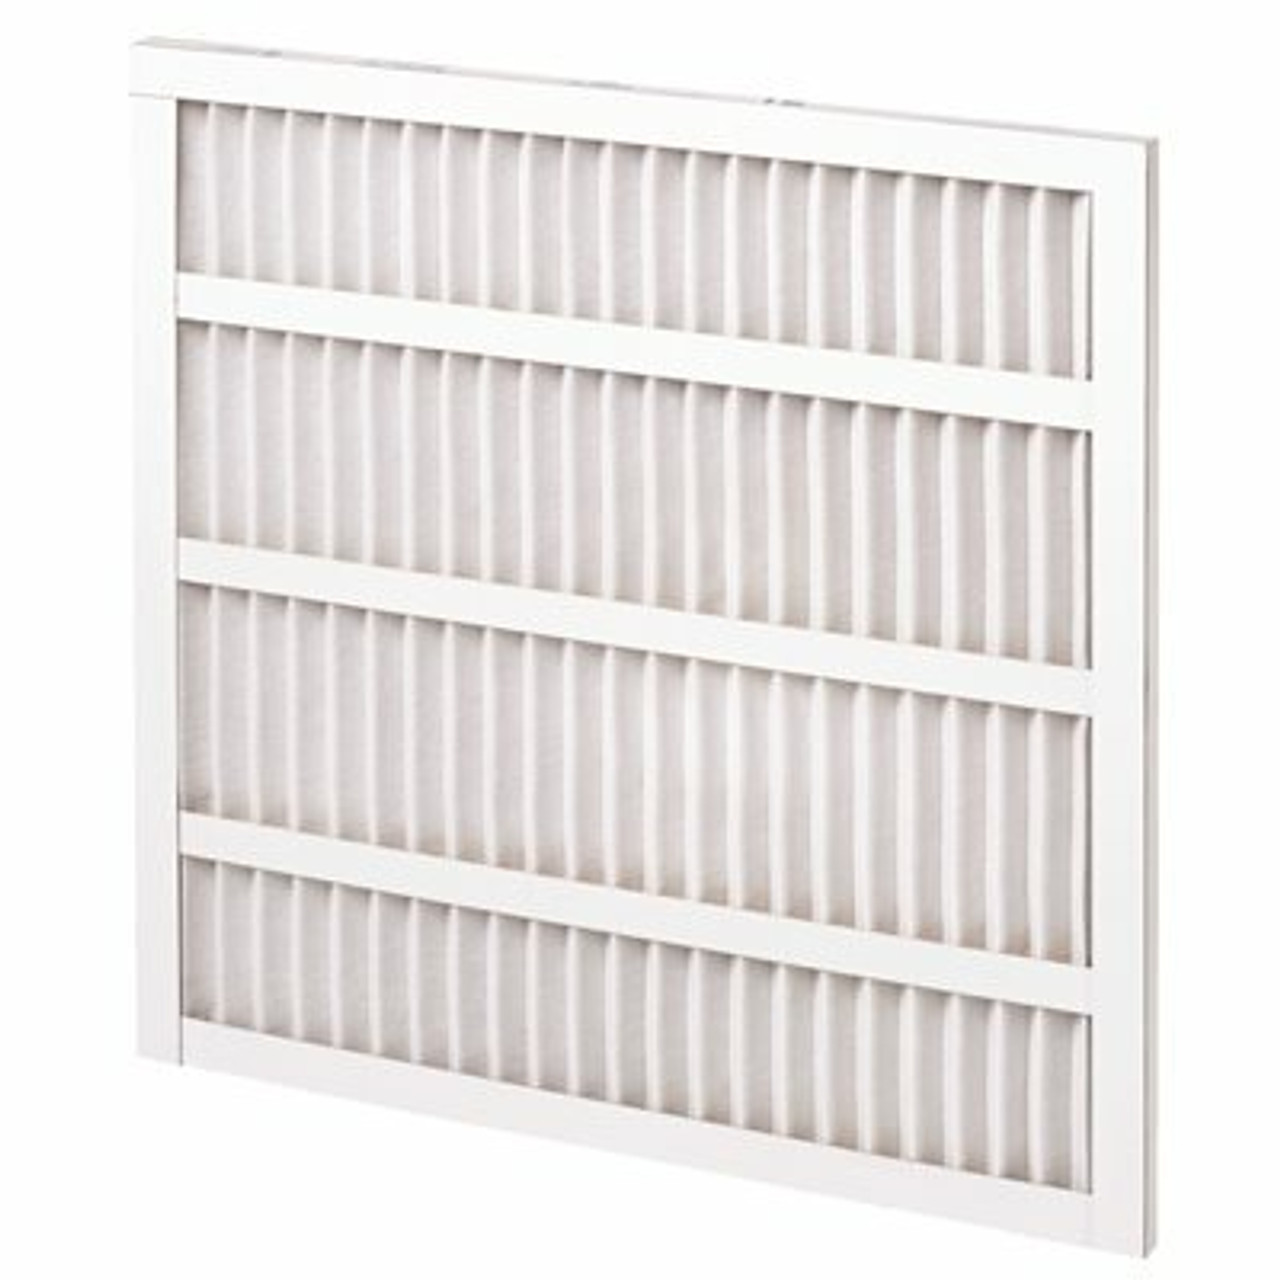 16 X 20 X 1 Pleated Air Filter Standard Capacity Self-Supported MERV 8 (12-Case)